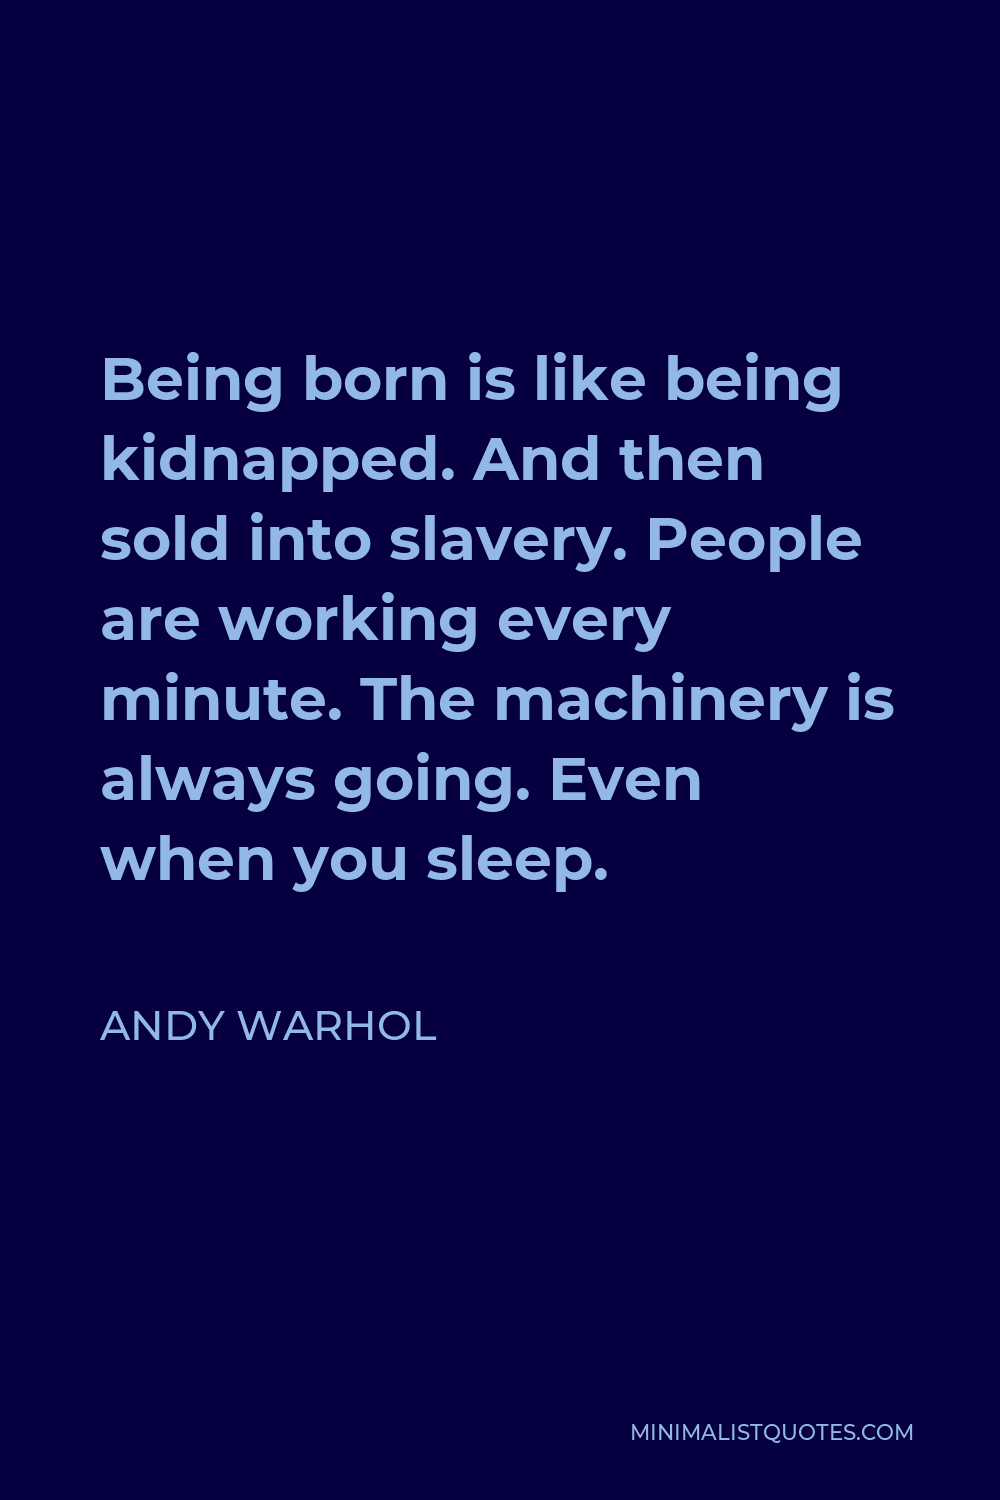 Andy Warhol Quote - Being born is like being kidnapped. And then sold into slavery. People are working every minute. The machinery is always going. Even when you sleep.